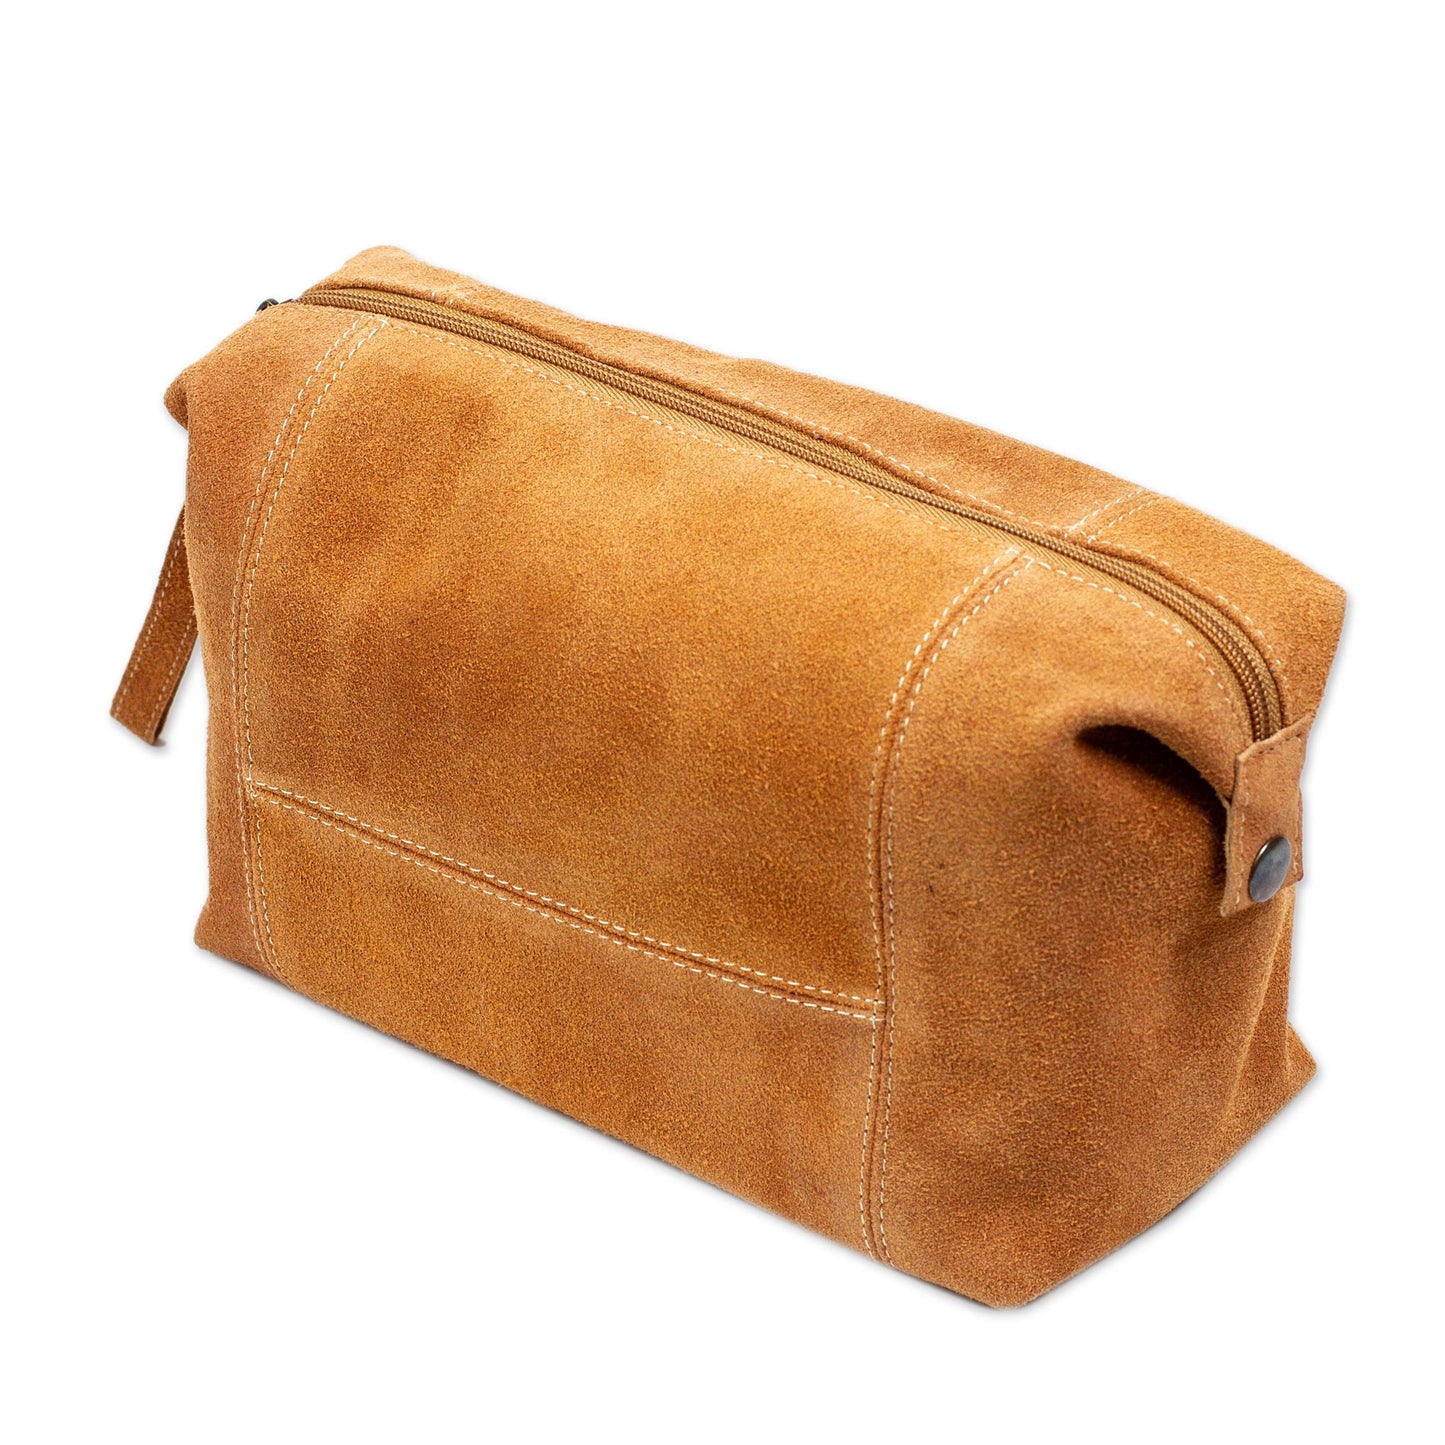 El Bajio Spice Brown Travel or Cosmetic Bag with Zipper and Strap